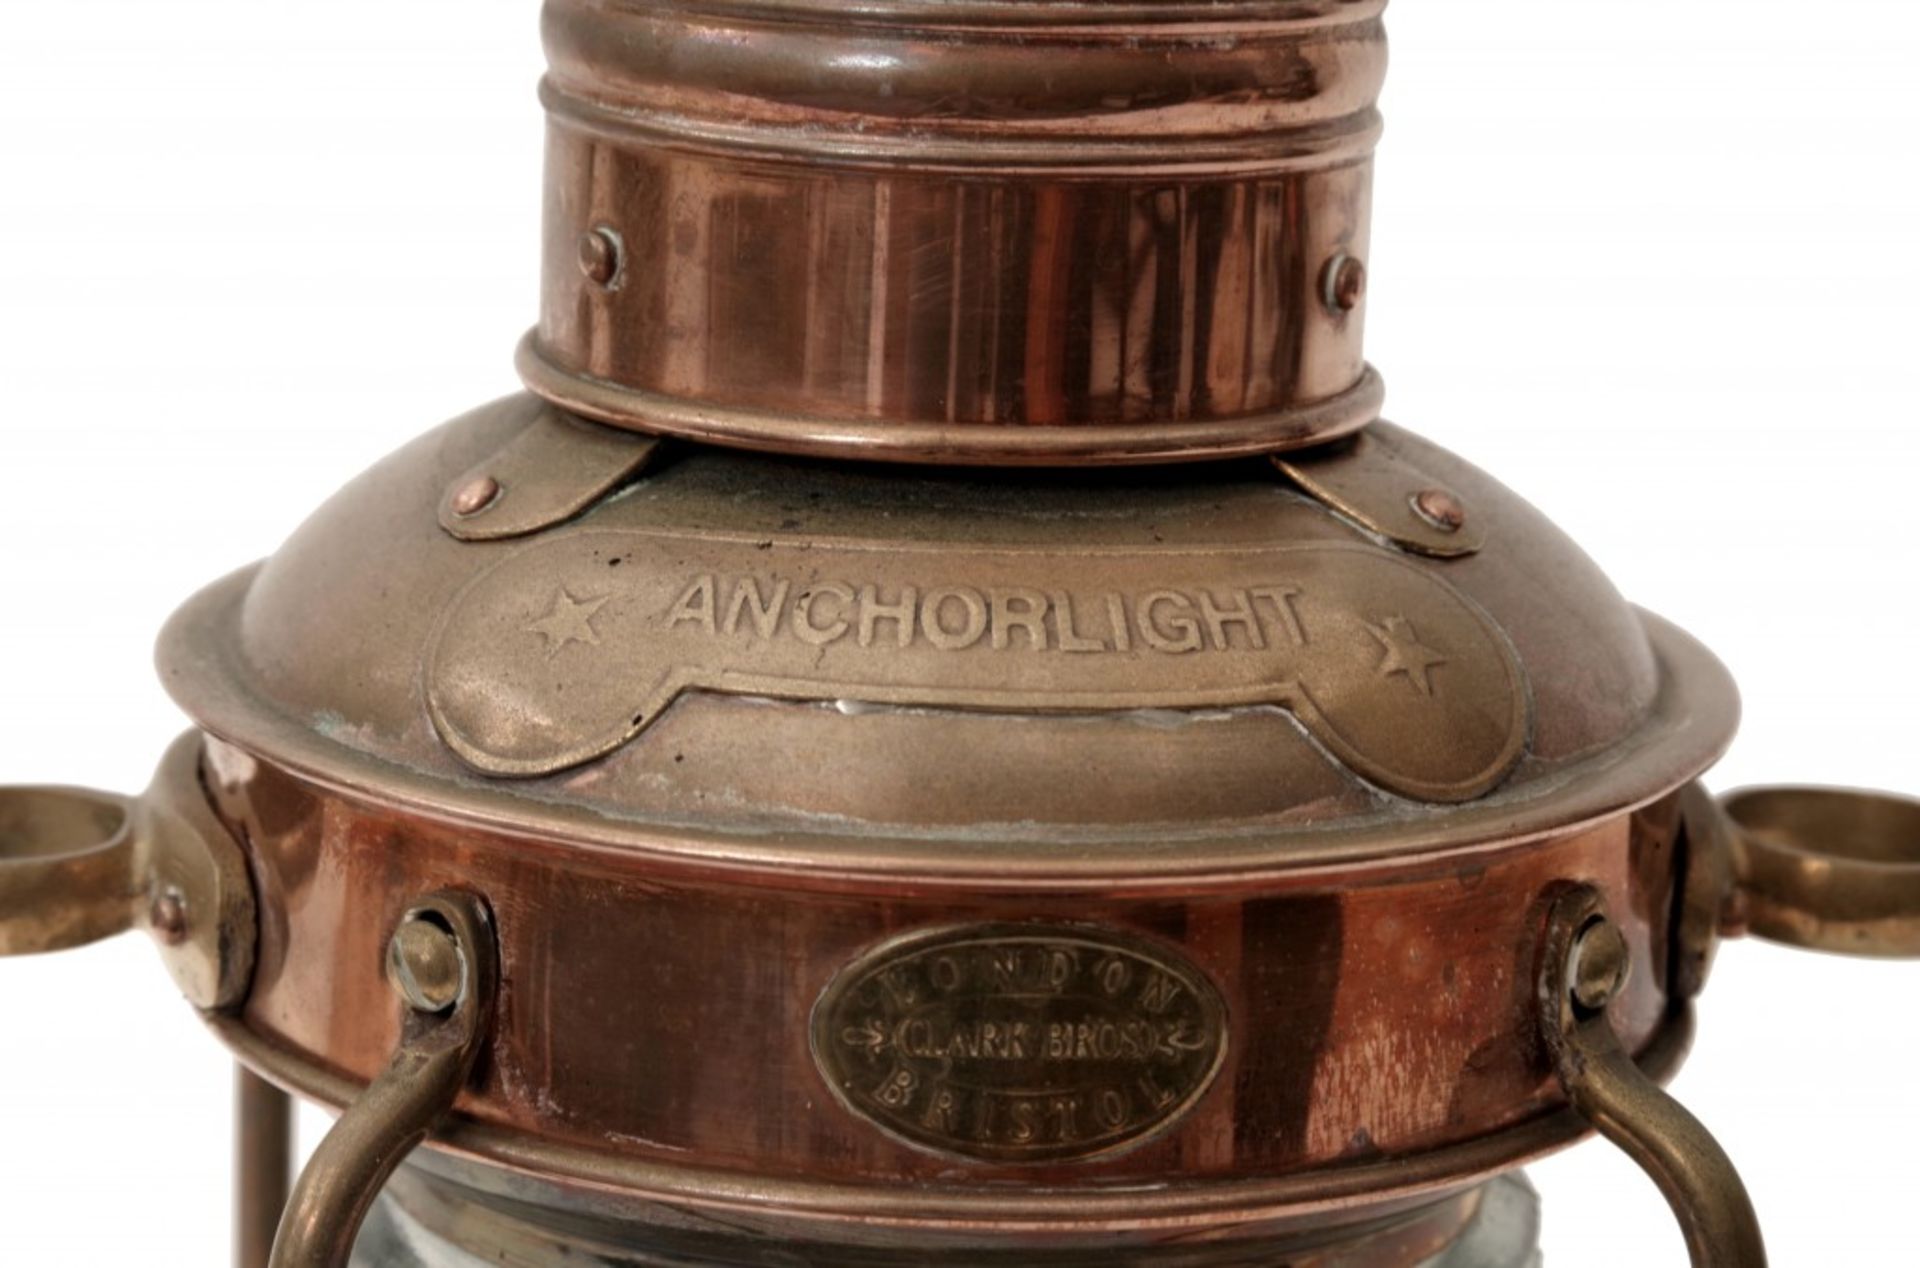 An Anchor Light by Clark Bros & Wooden Pulley - Image 4 of 6